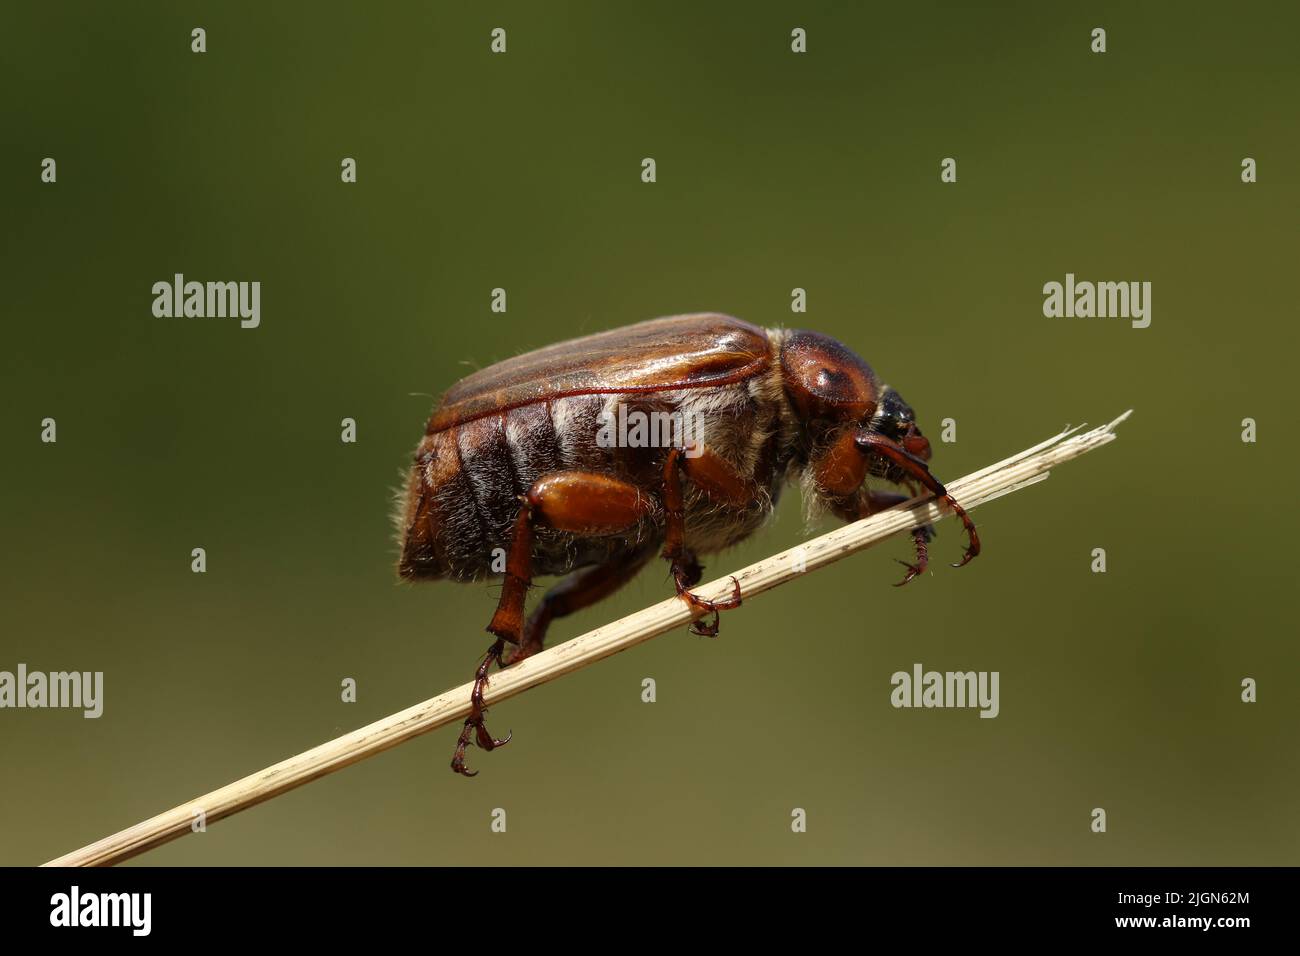 A Summer Chafer Beetle, Amphimallon solstitialis, climbing up a blade of grass in a meadow. Stock Photo